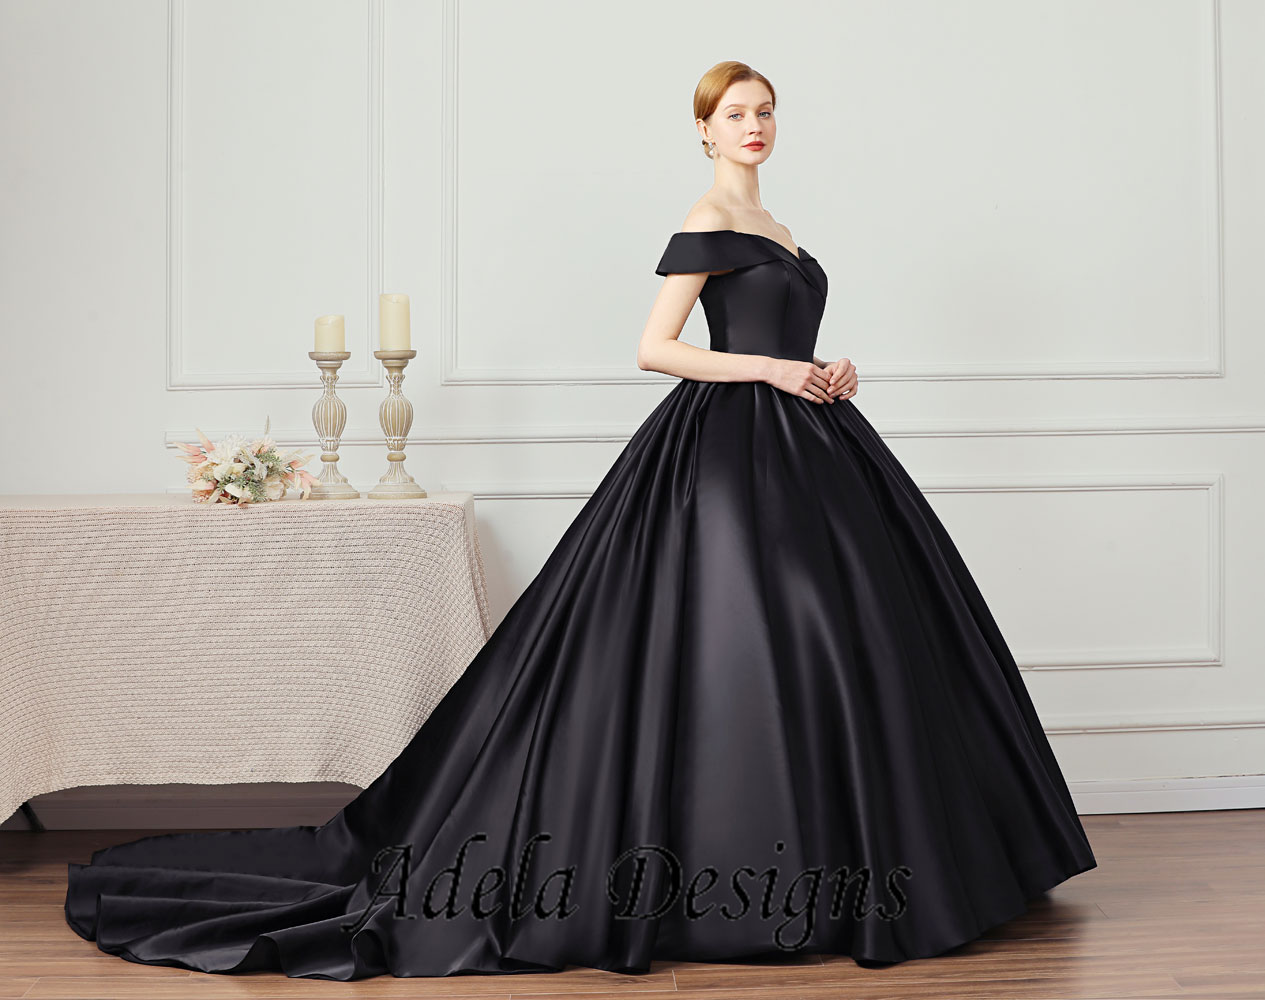 Black Satin Strapless Tulle Gothic Evening Gown With Empire Waist And  Ruched Detail Vintage Style For Womens Dance, Prom, Formal Parties Plus  Size Available CL1641 From Allloves, $102.58 | DHgate.Com